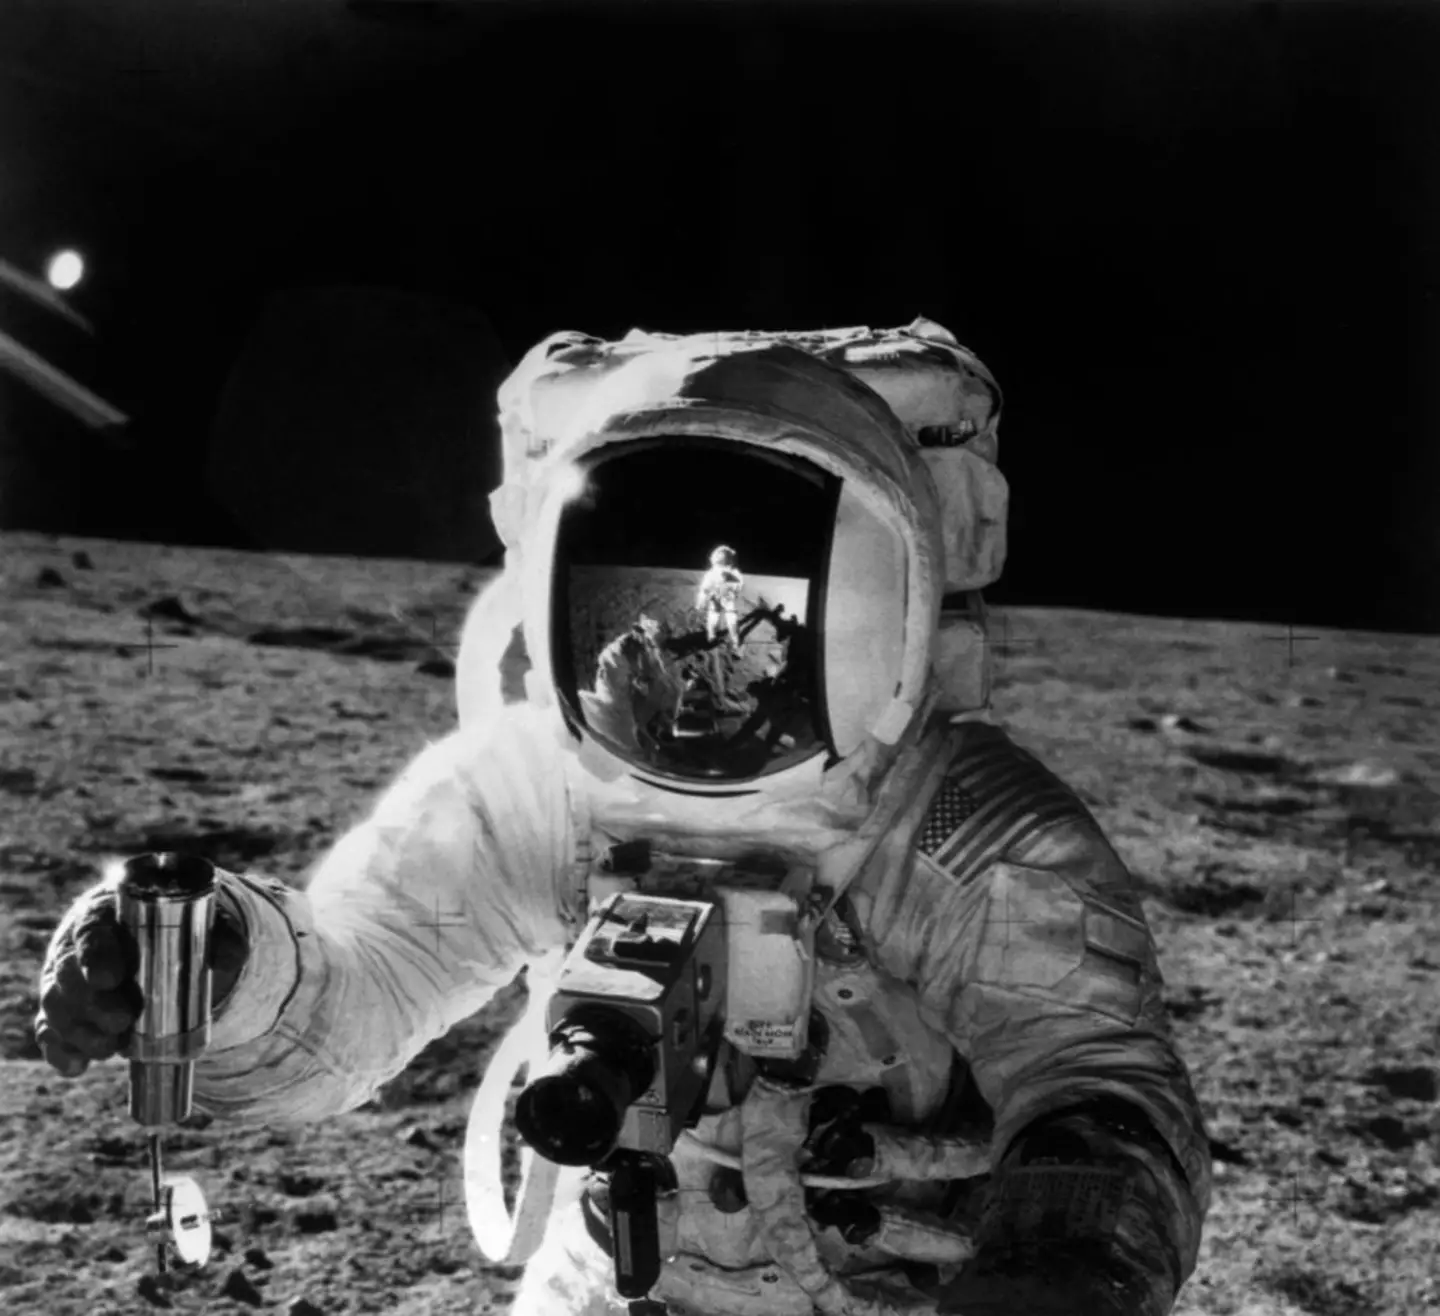 People think they have the evidence to disprove the legitimacy of the first ever moon landing.